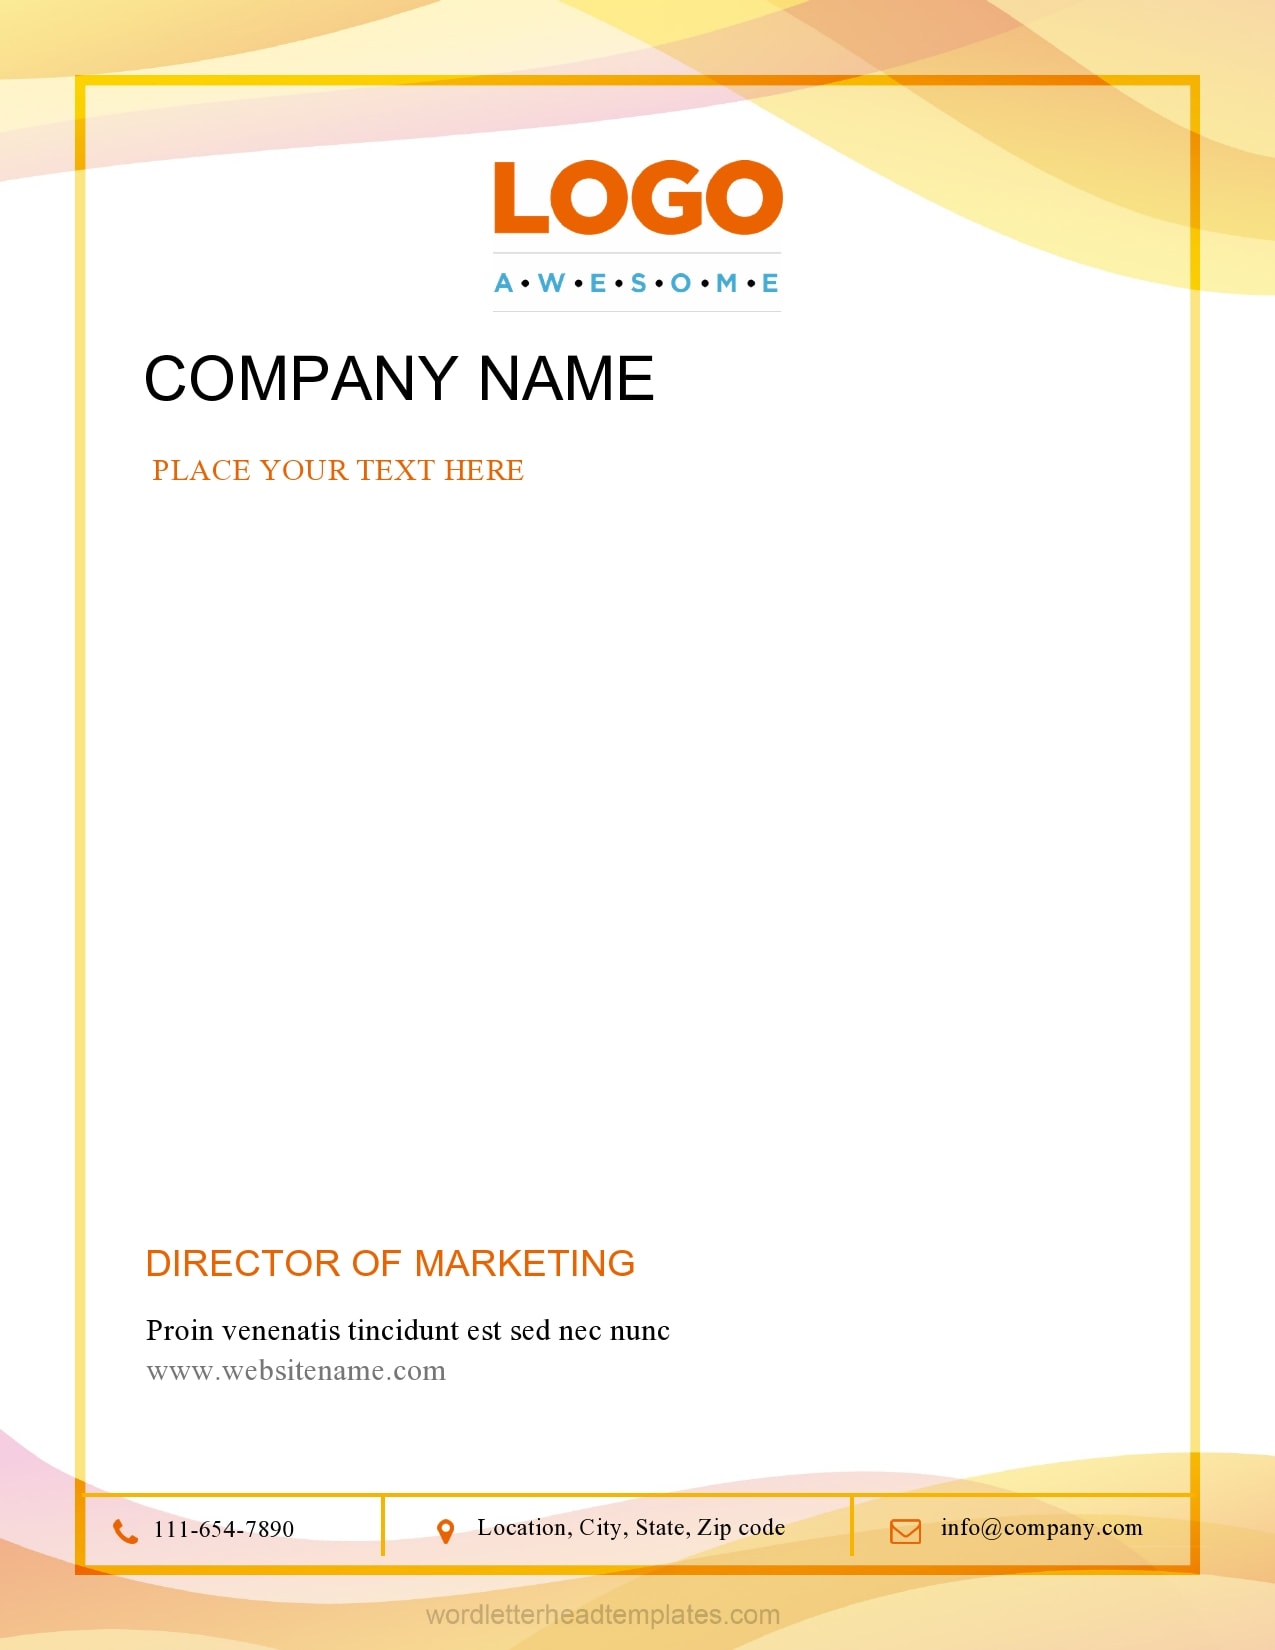 How To Create A Business Letterhead Template In Word